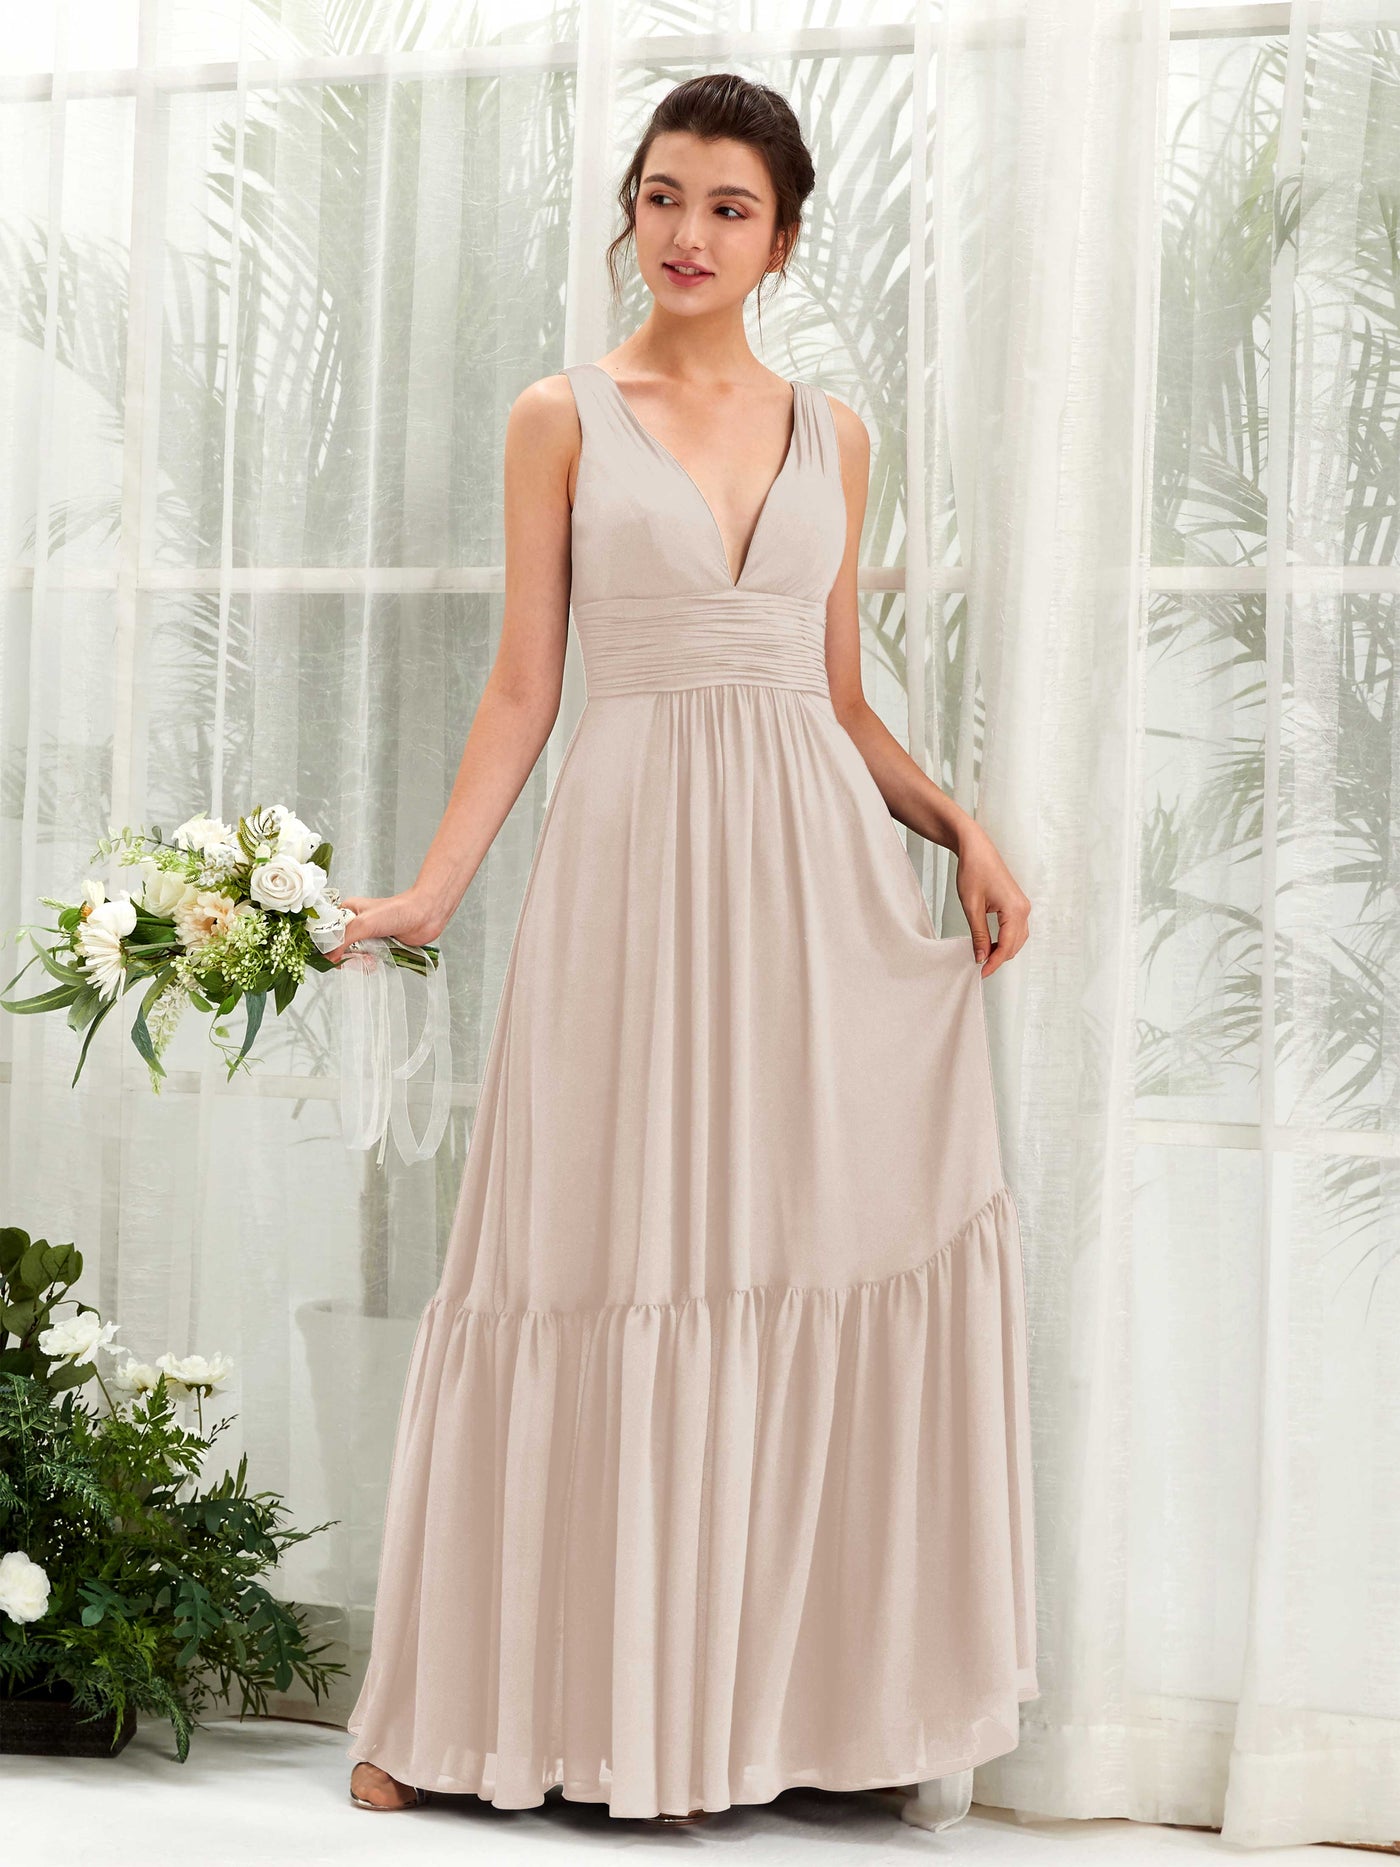 Champagne Bridesmaid Dresses Bridesmaid Dress A-line Chiffon Straps Full Length Sleeveless Wedding Party Dress (80223716)#color_champagne